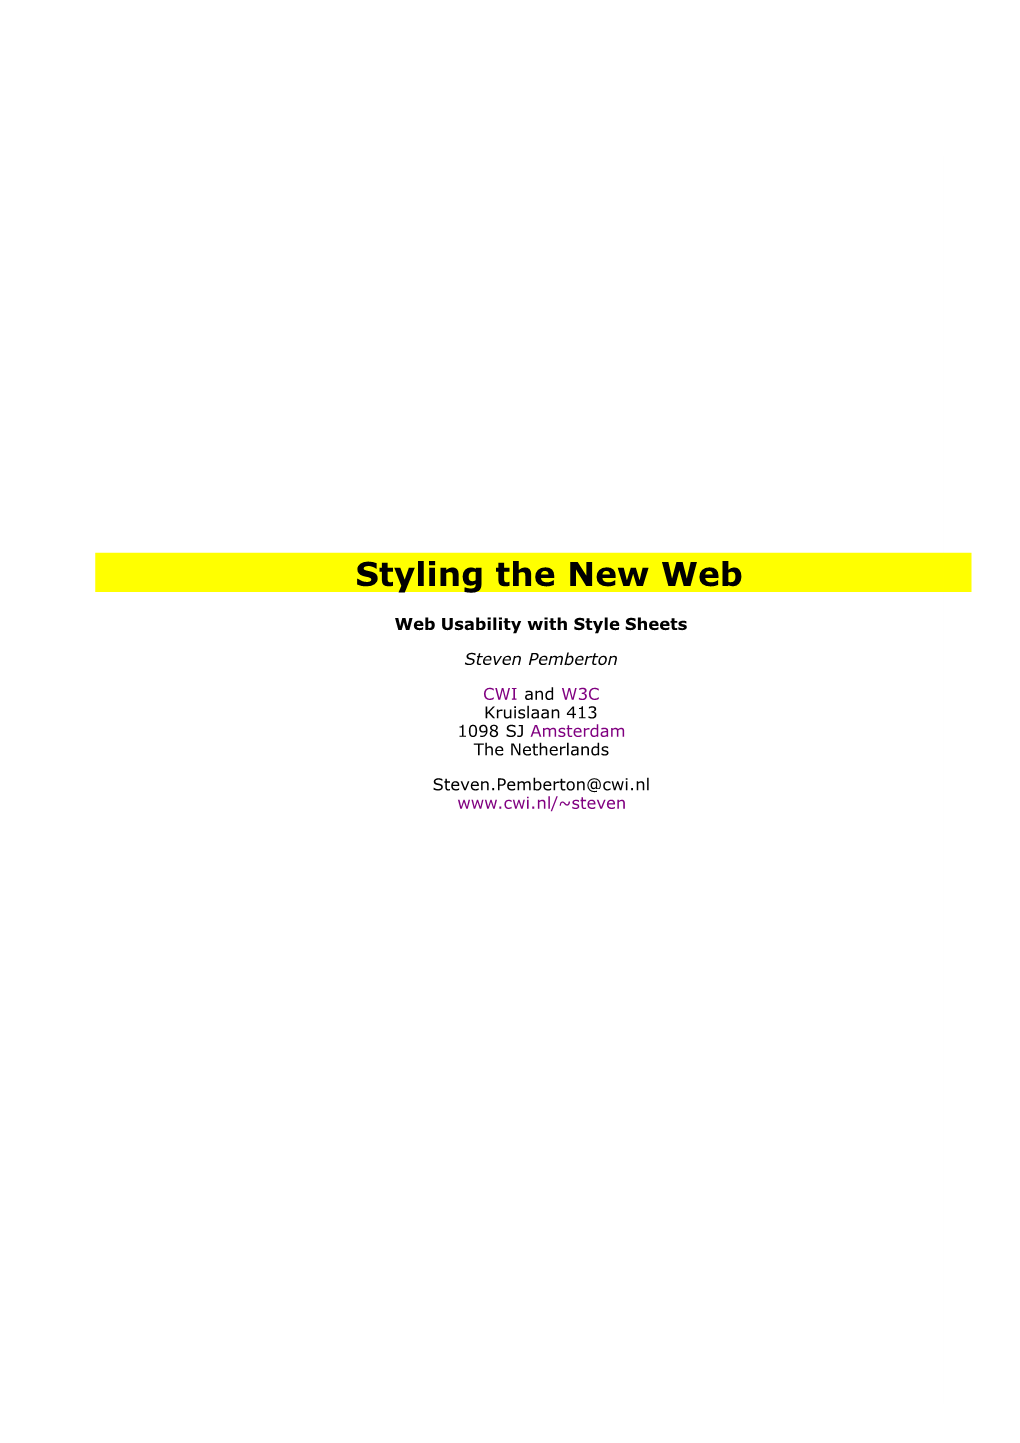 Web Usability with Style Sheets